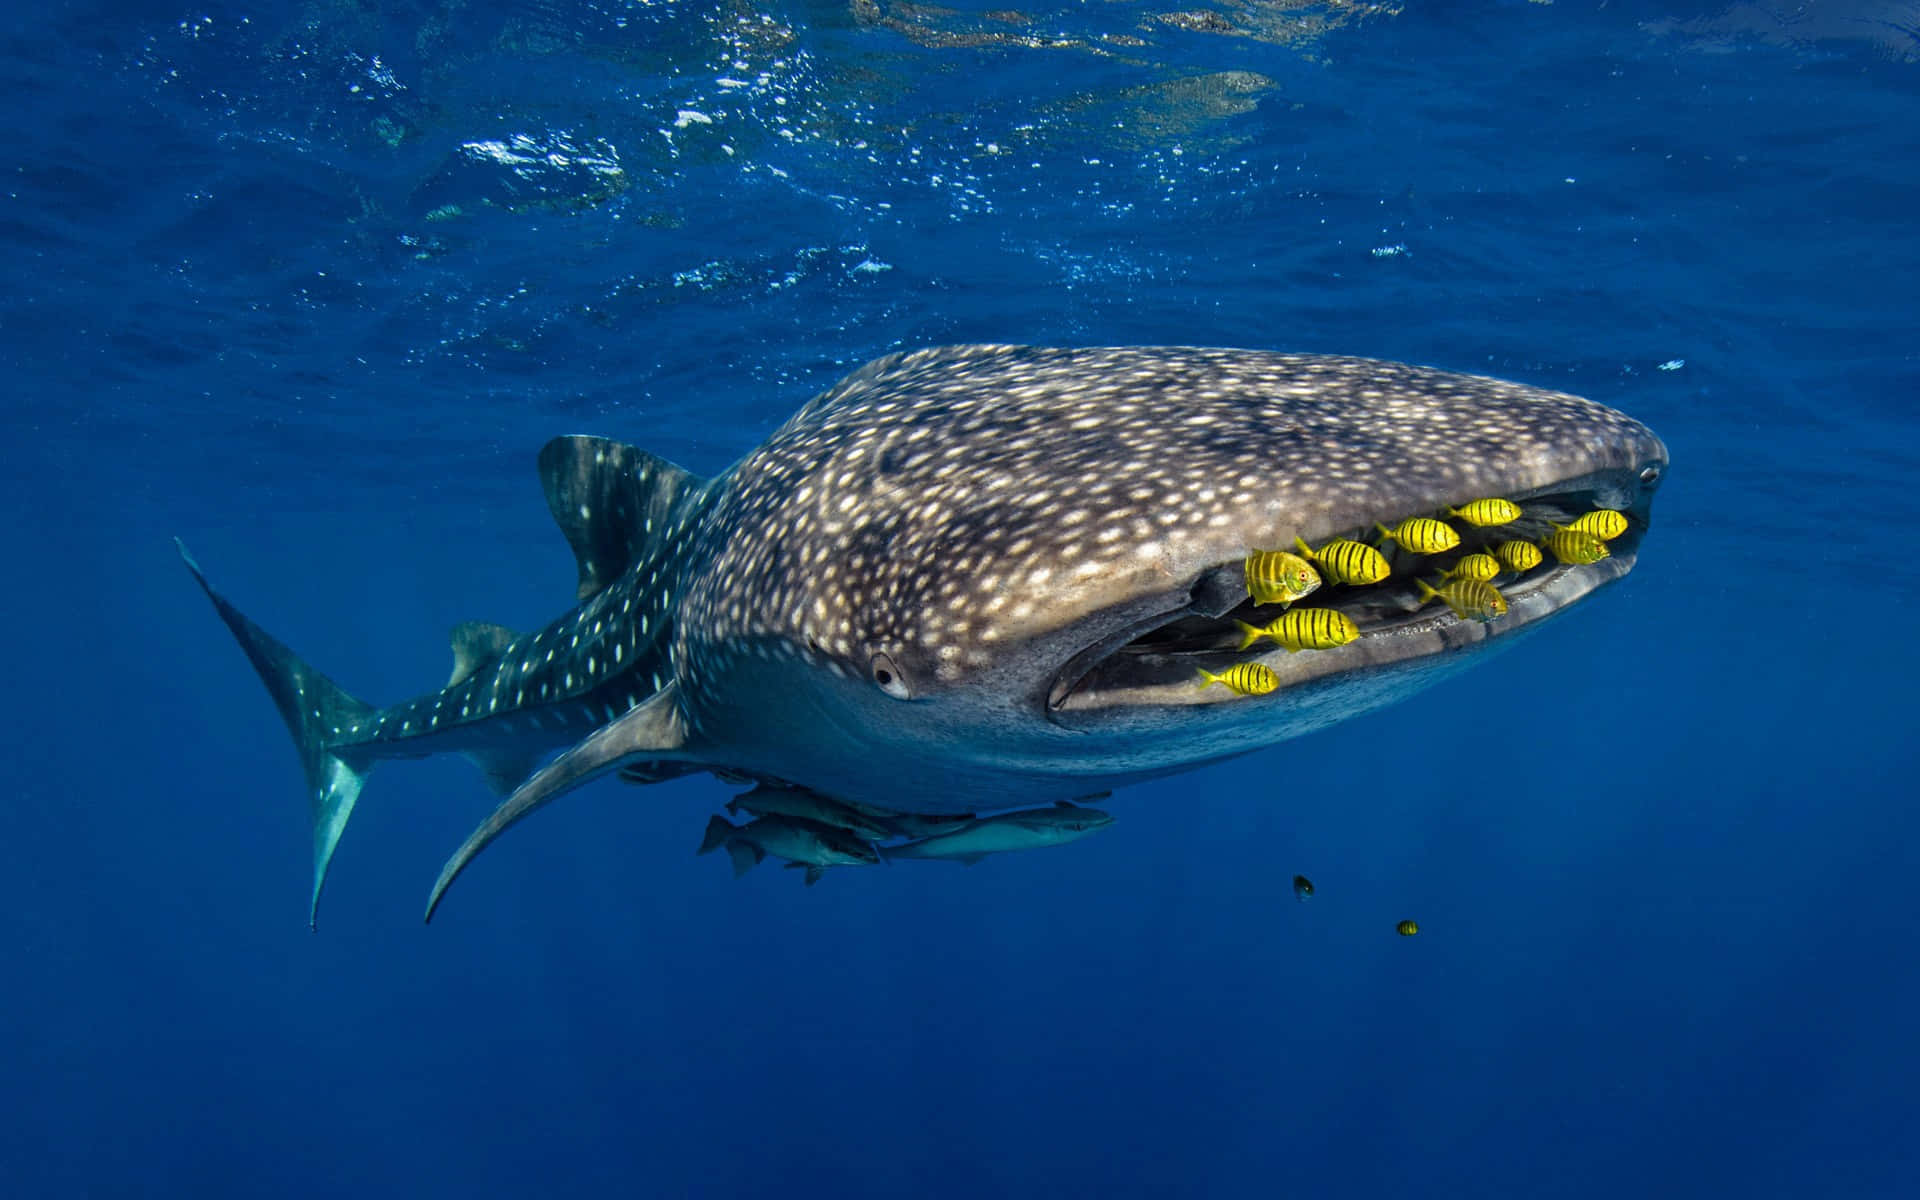 Get Up Close and Personal With a Whale Shark